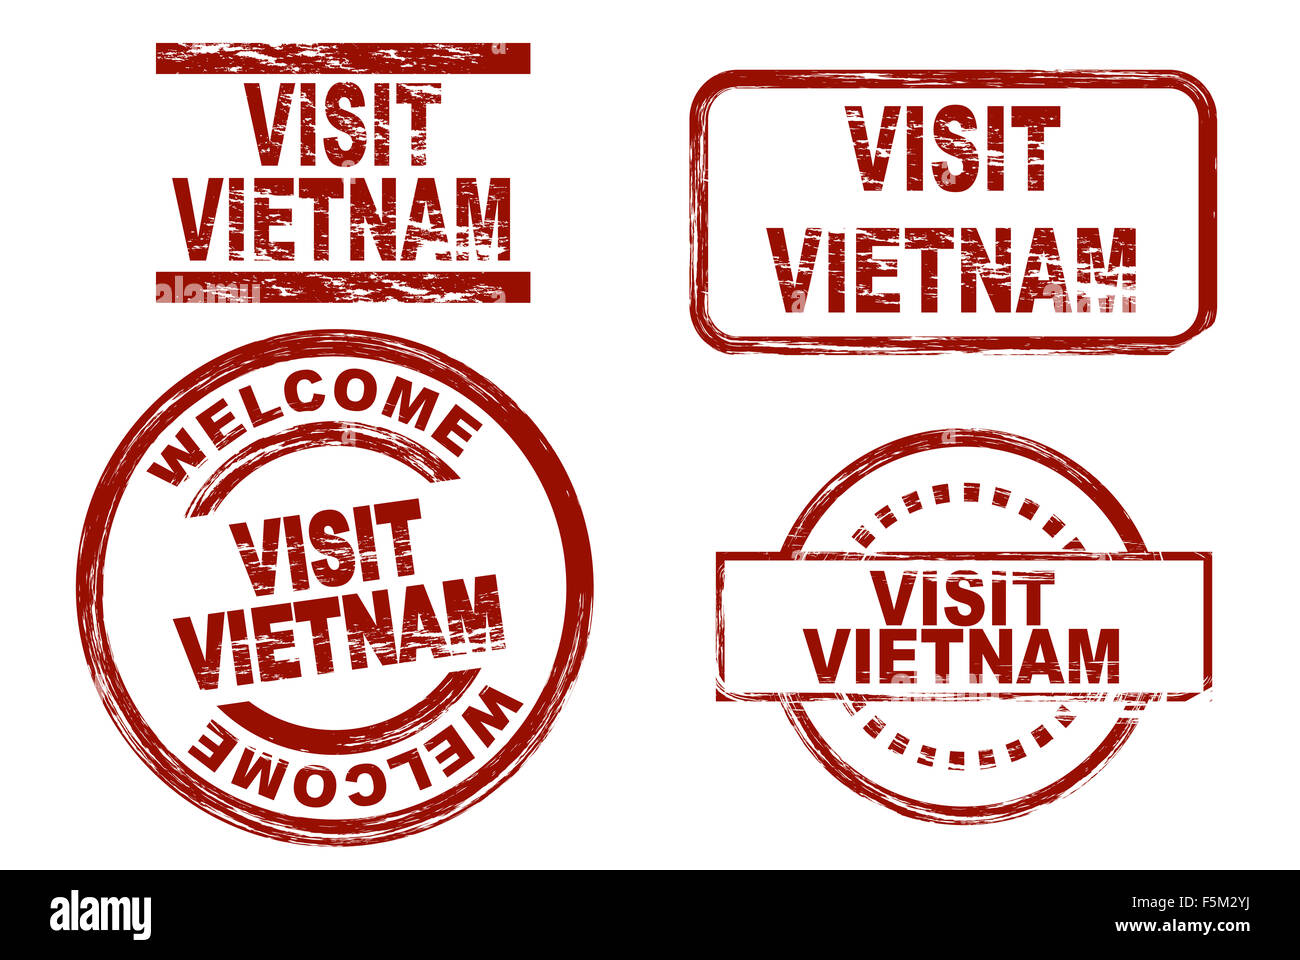 Set of stylized ink stamps showing the term visit vietnam. All on white background. Stock Photo